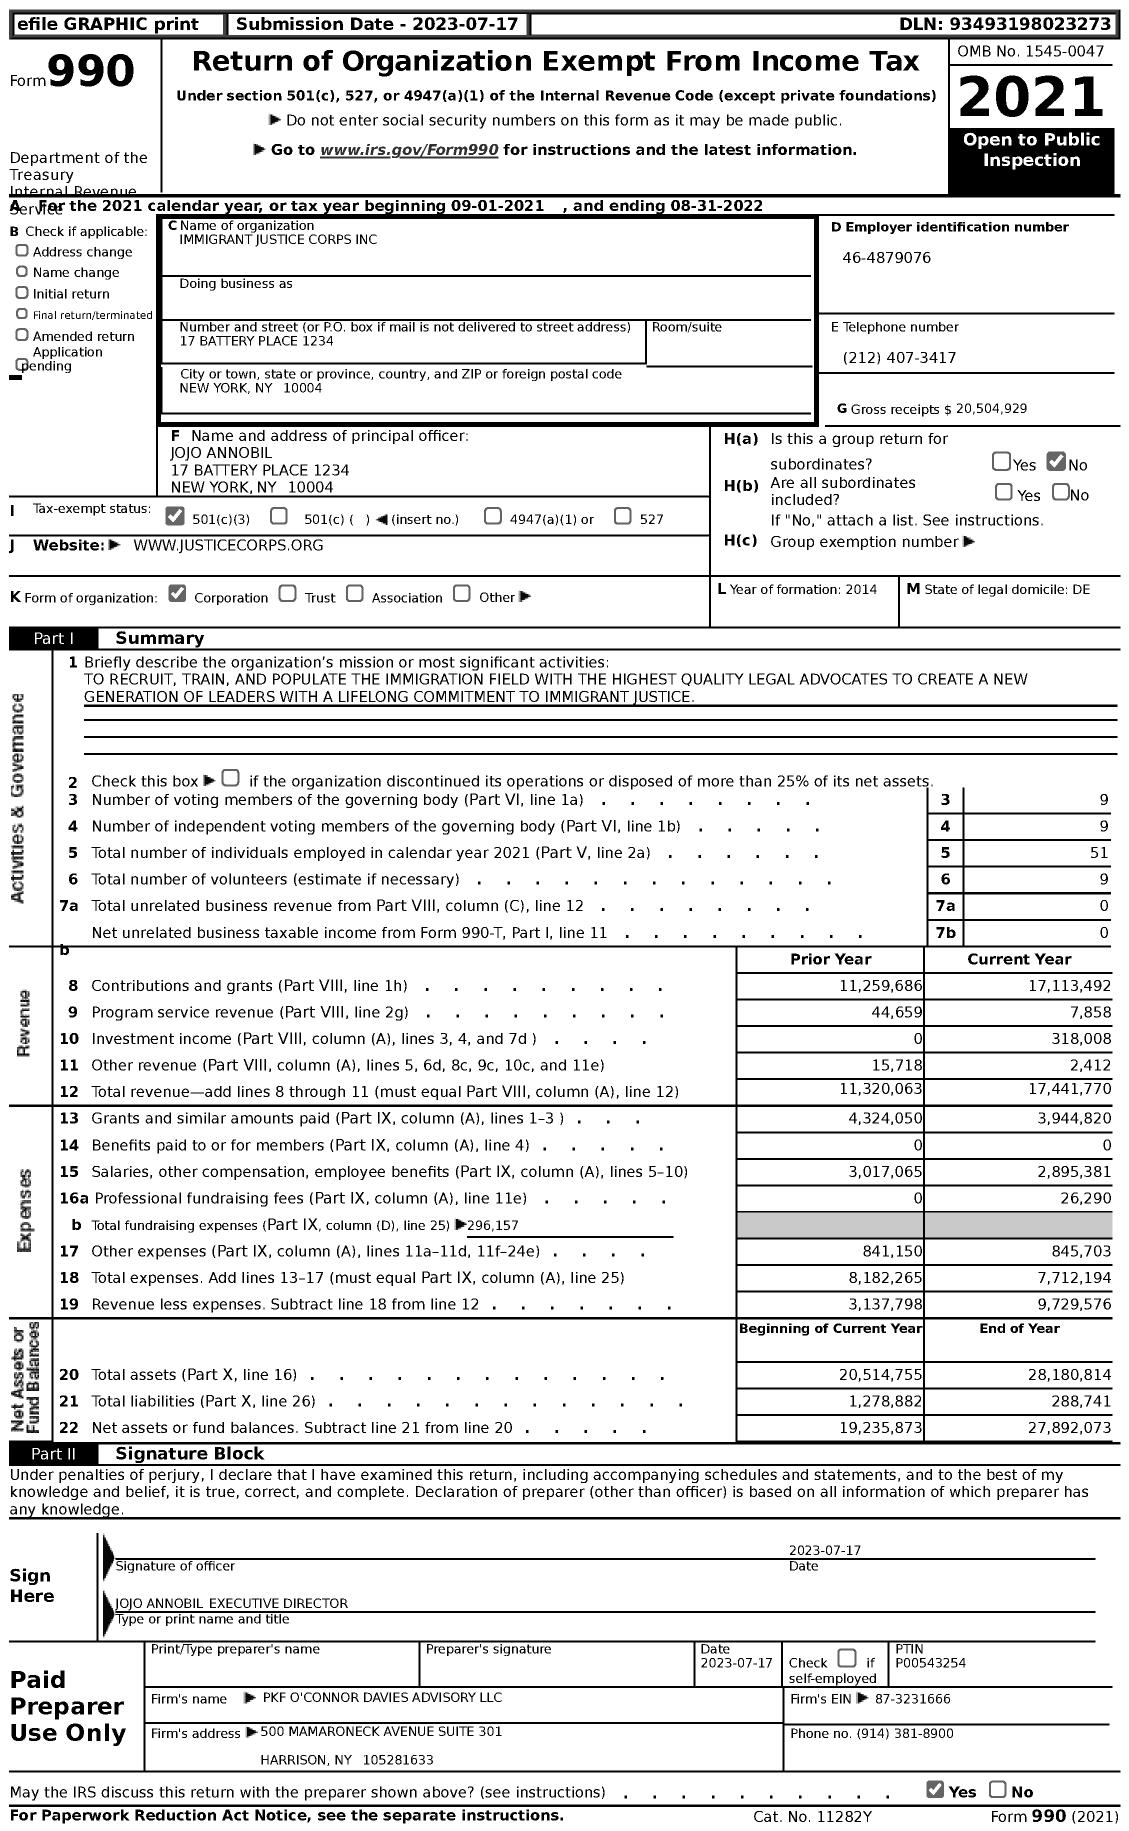 Image of first page of 2021 Form 990 for Immigrant Justice Corps (IJC)